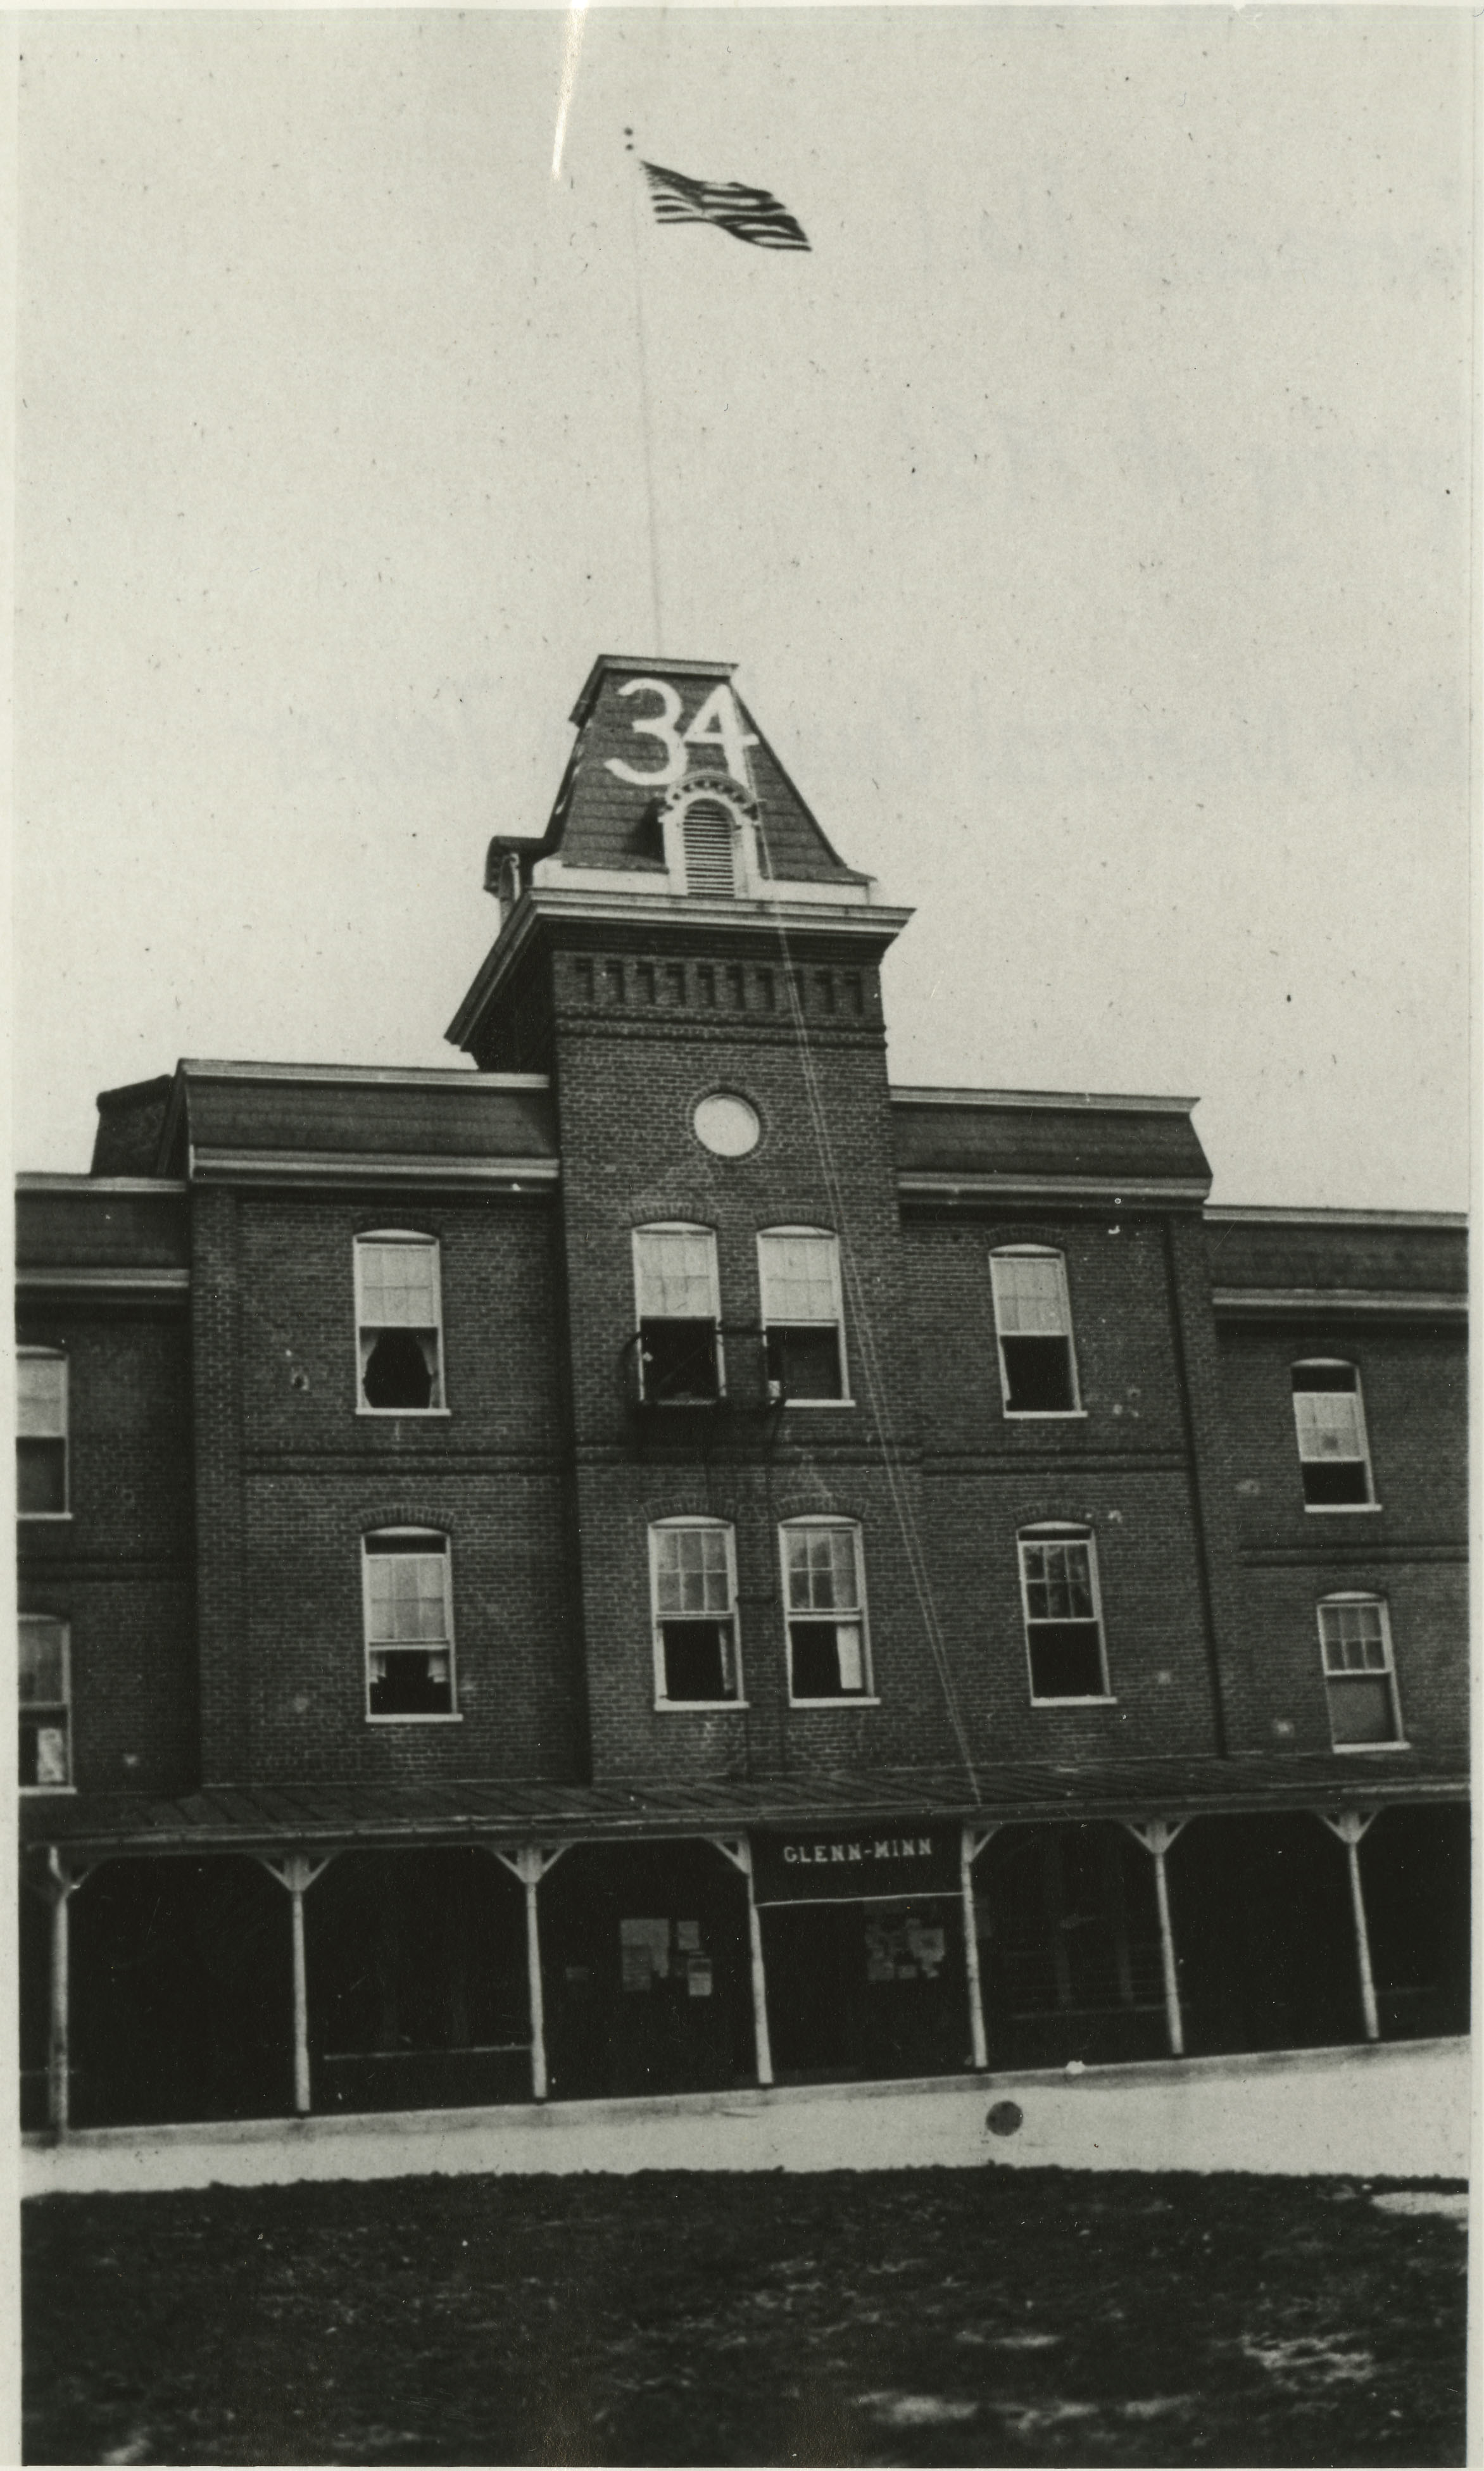 Barracks No. 1 (now Lane Hall), Spring 1931, "Rat Numeral Painted on Tower." Apparently, a freshman cadet was being called out!